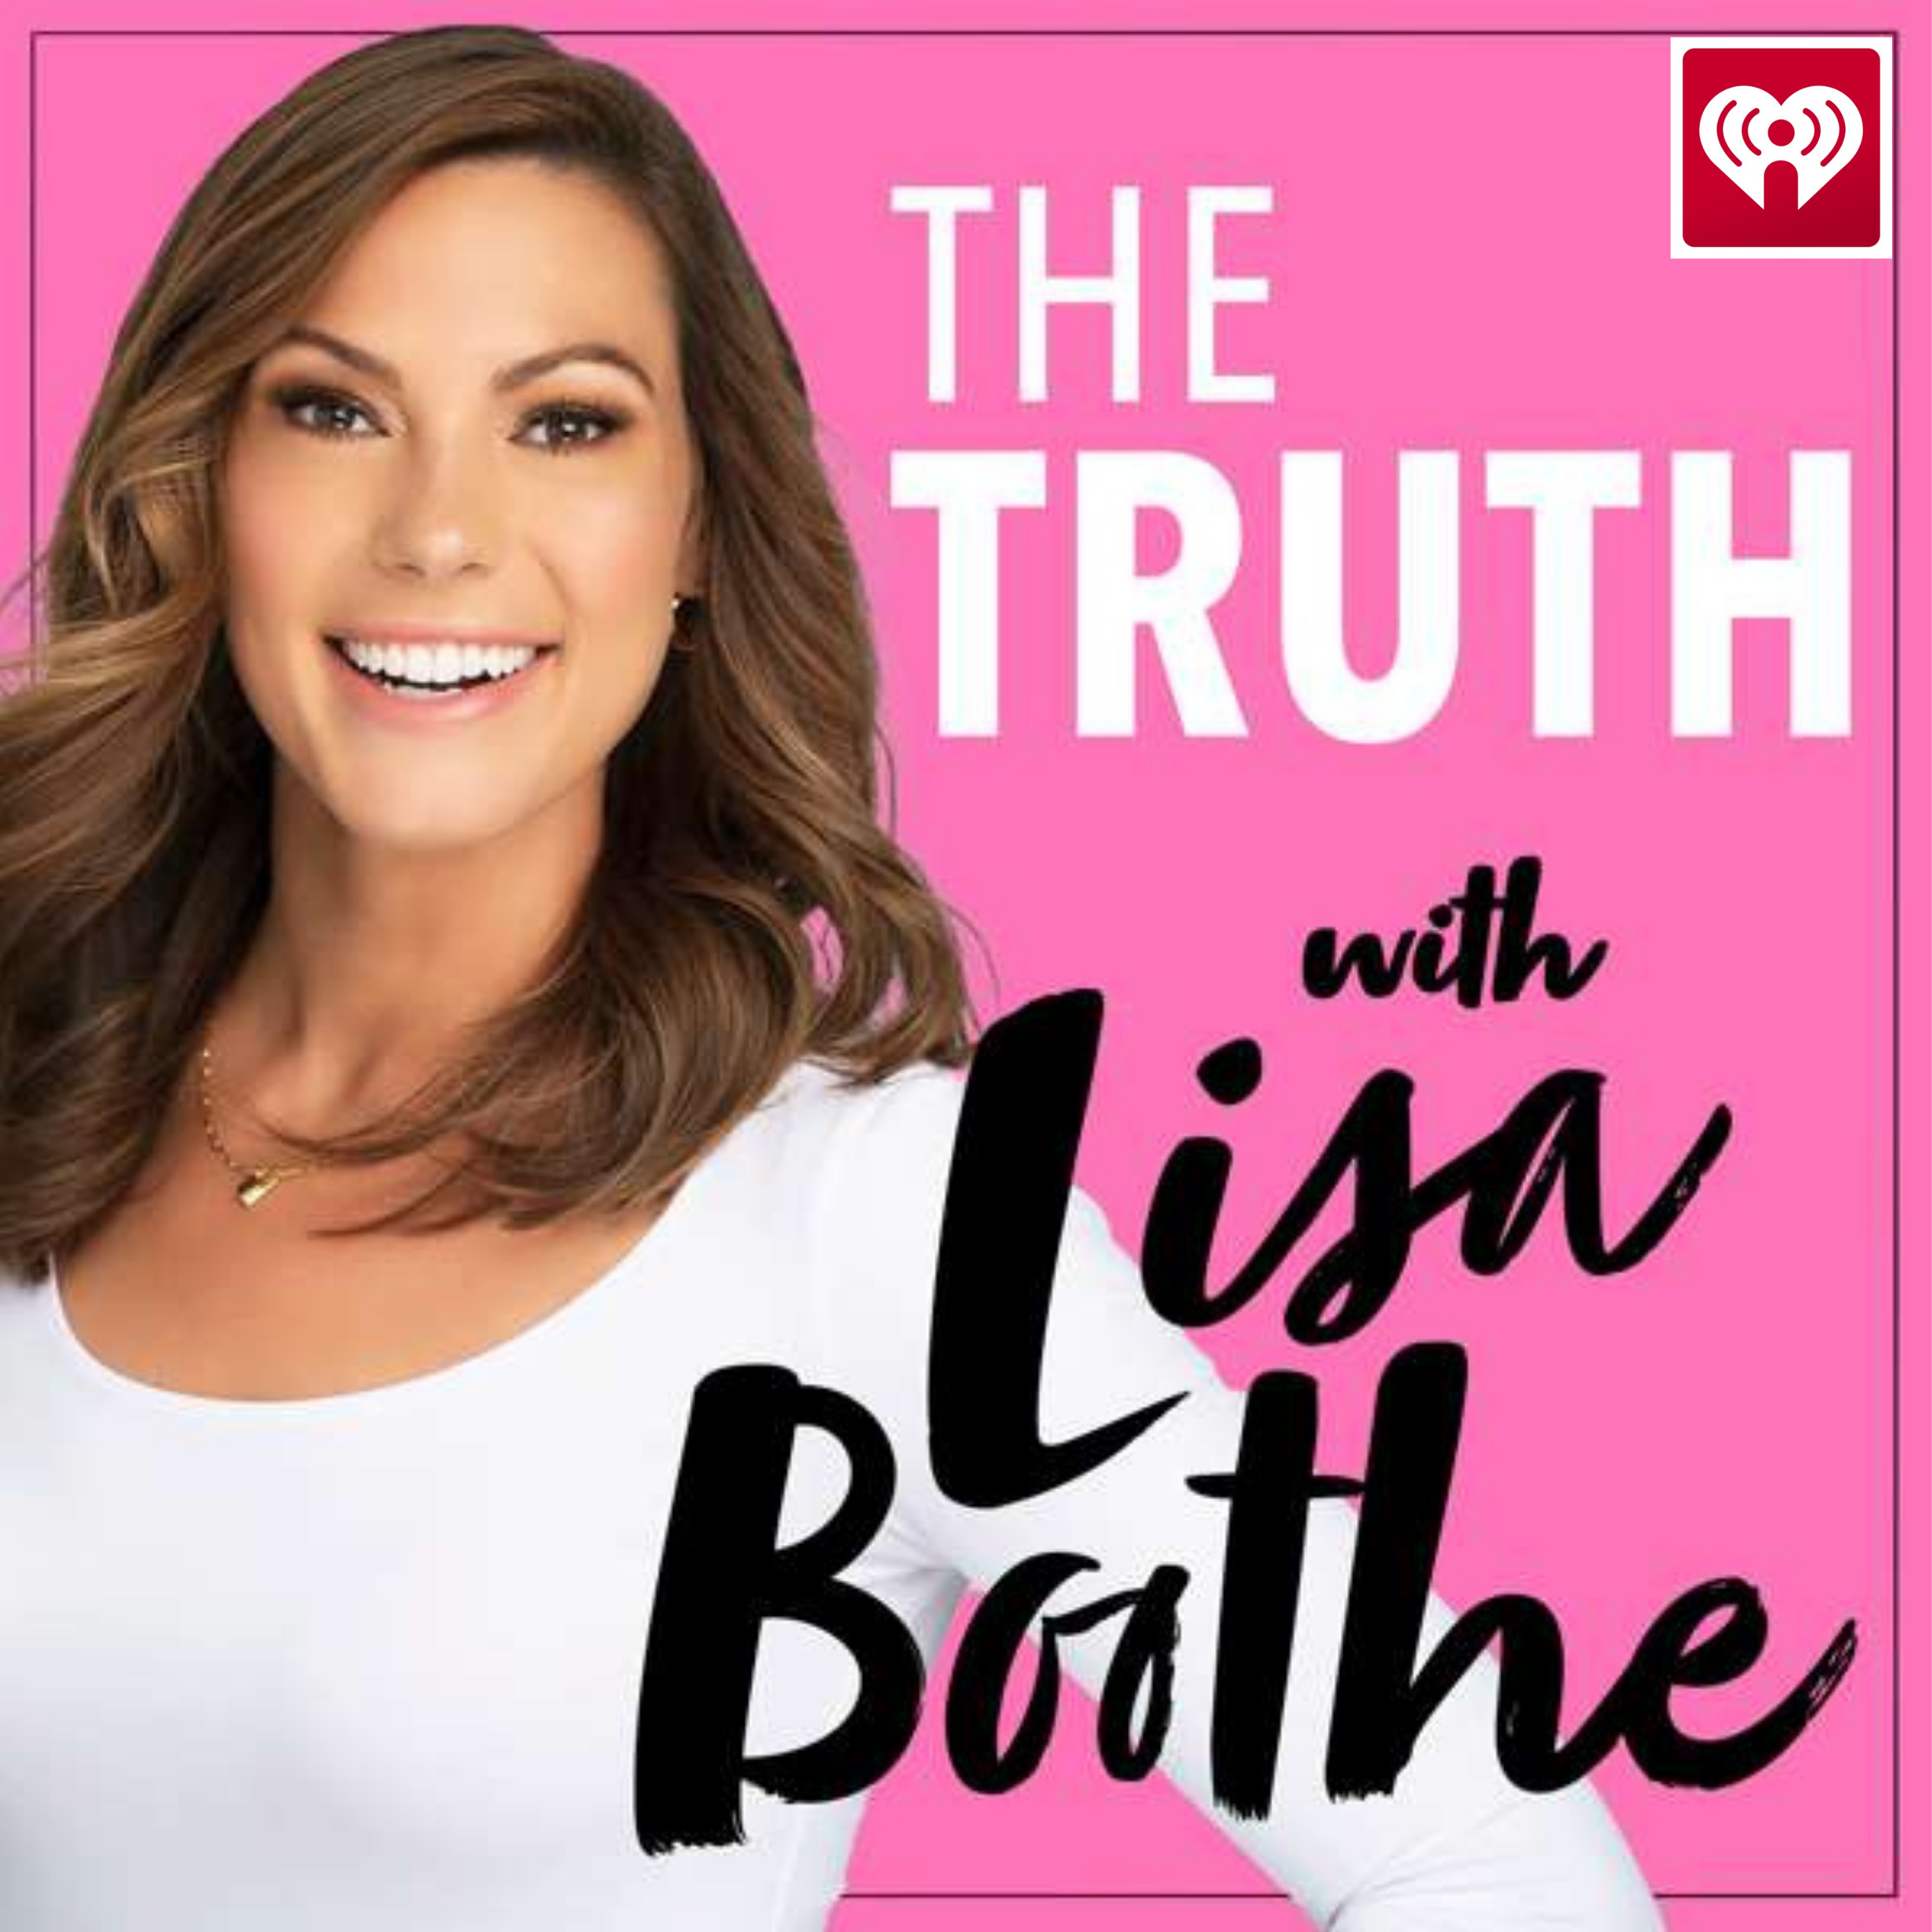 The Truth with Lisa Boothe: Why Did Harvard Fire Dr. Martin Kulldorff?